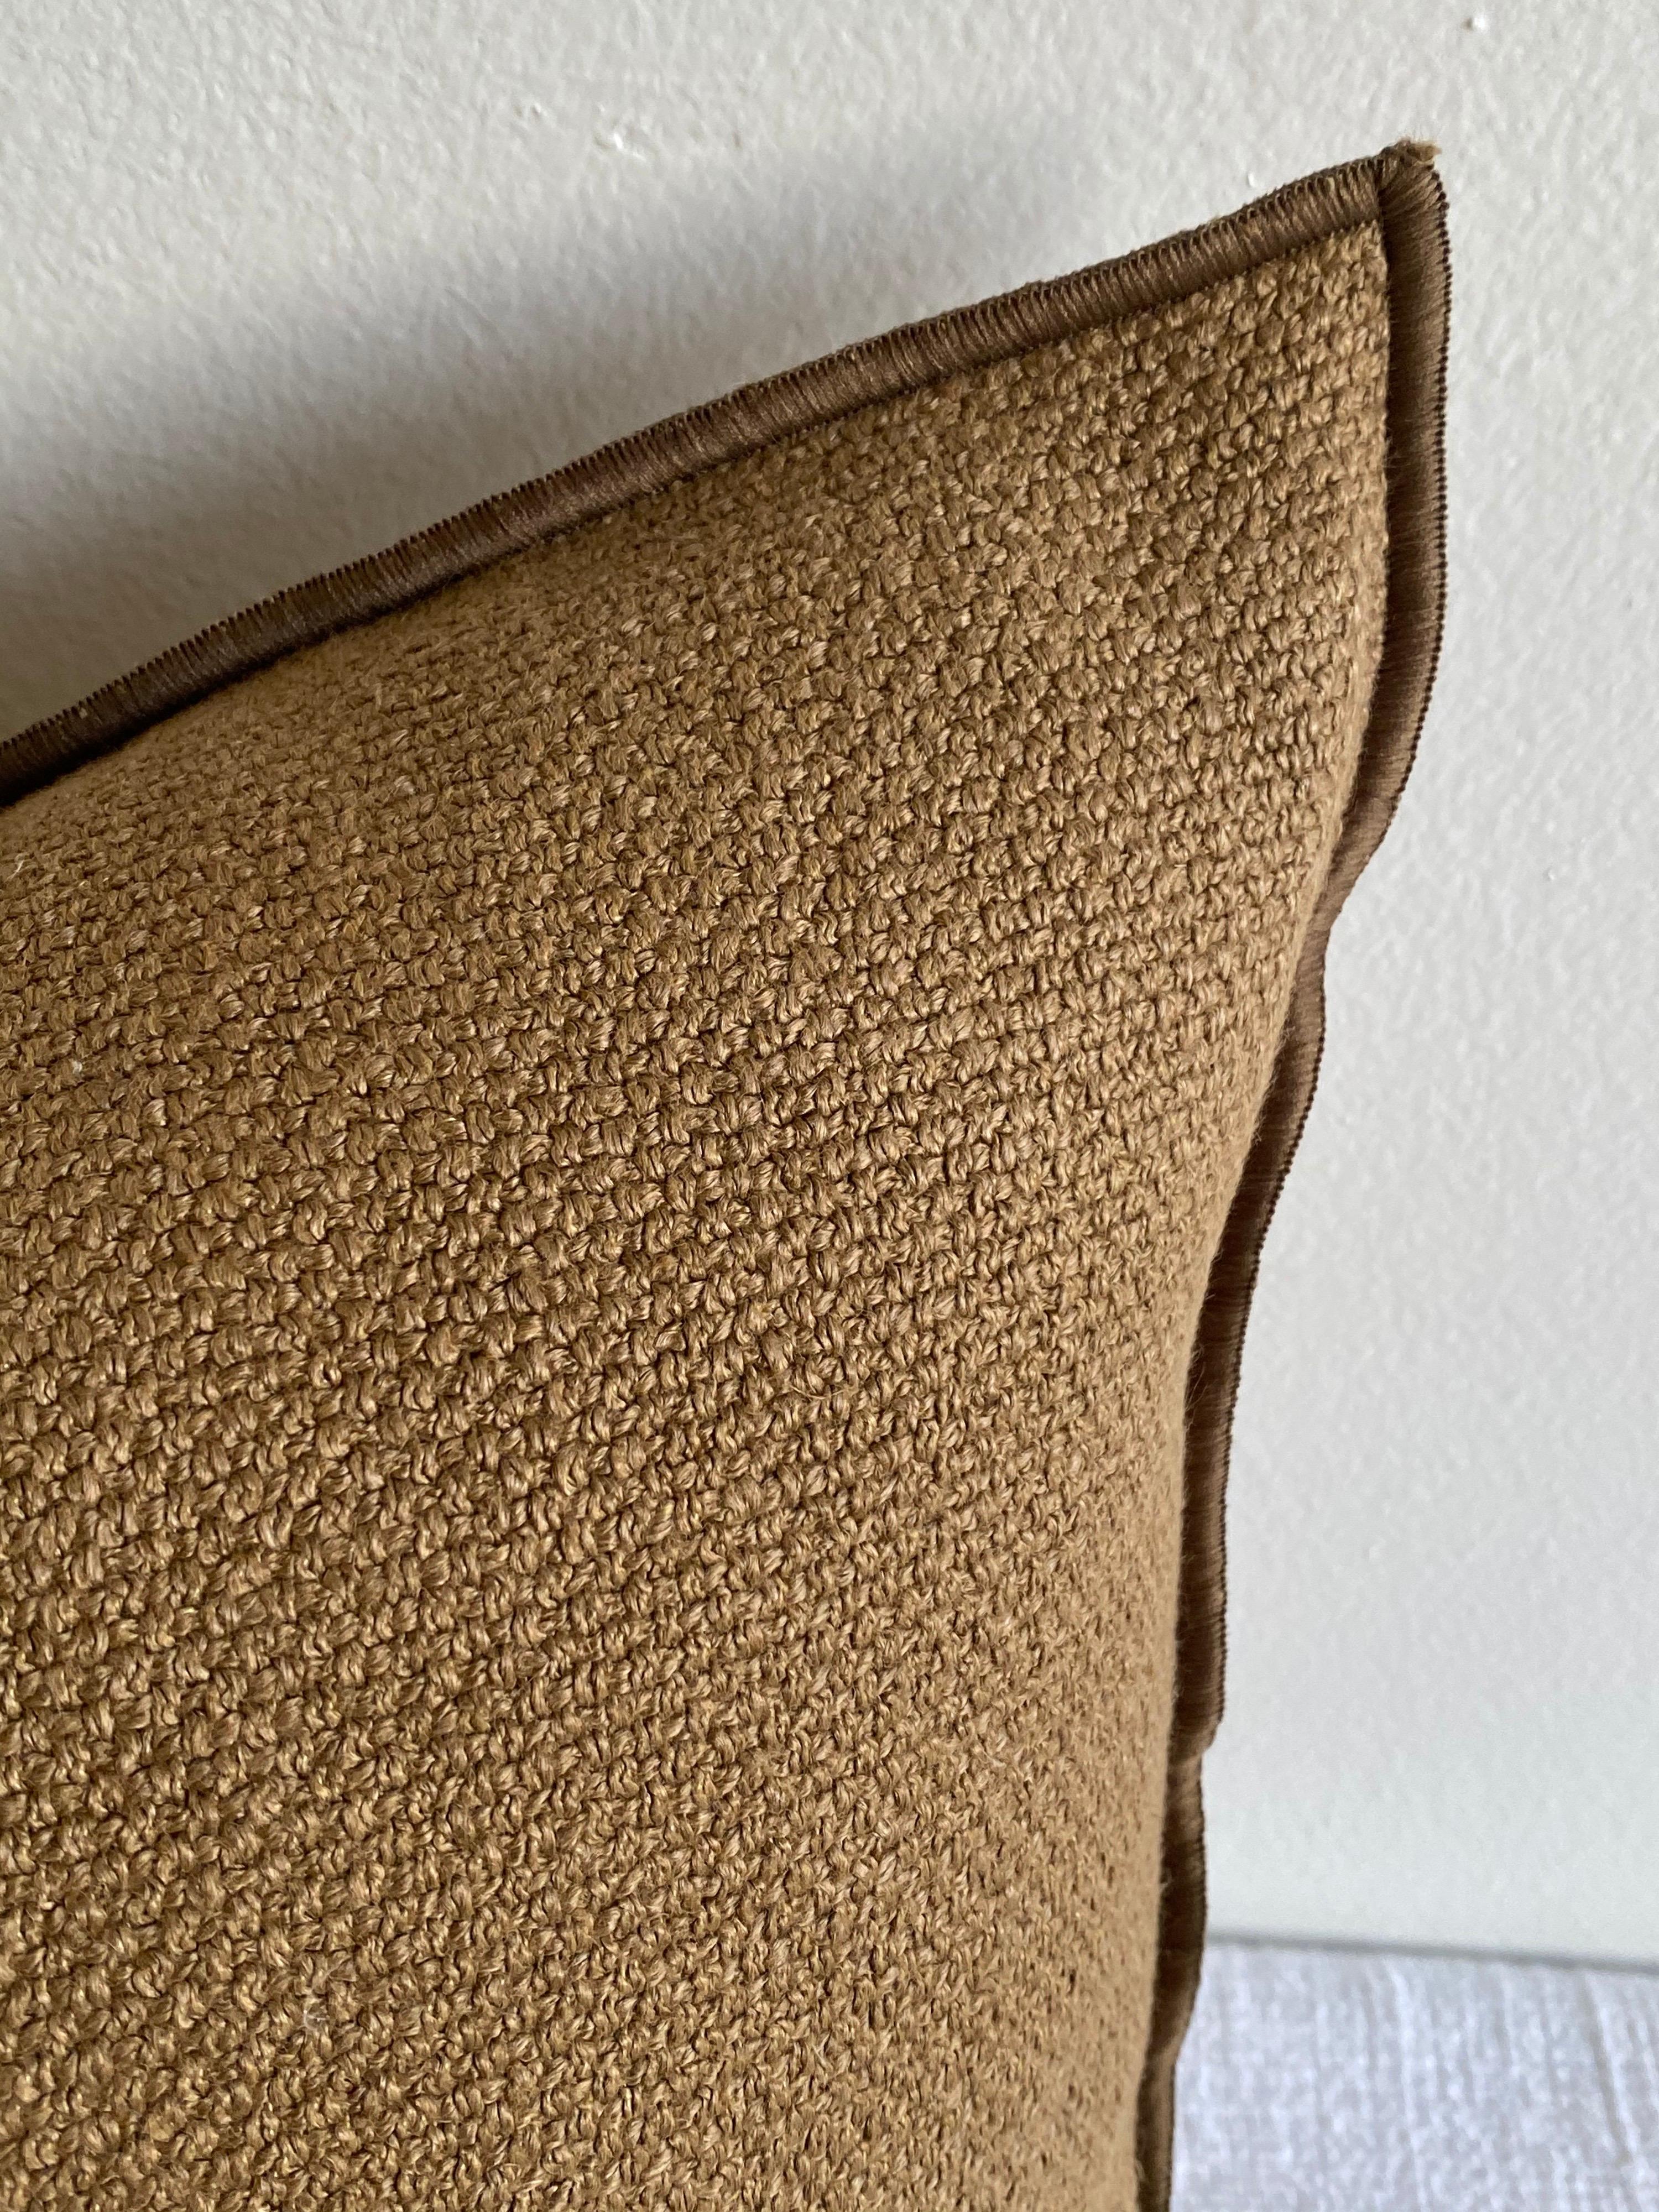 Custom linen blend accent pillow with down insert
Color: cappuccino fromentera
A copper / brown colored nubby textured style pillow with a stitched edge, metal zipper closure.
Size 15